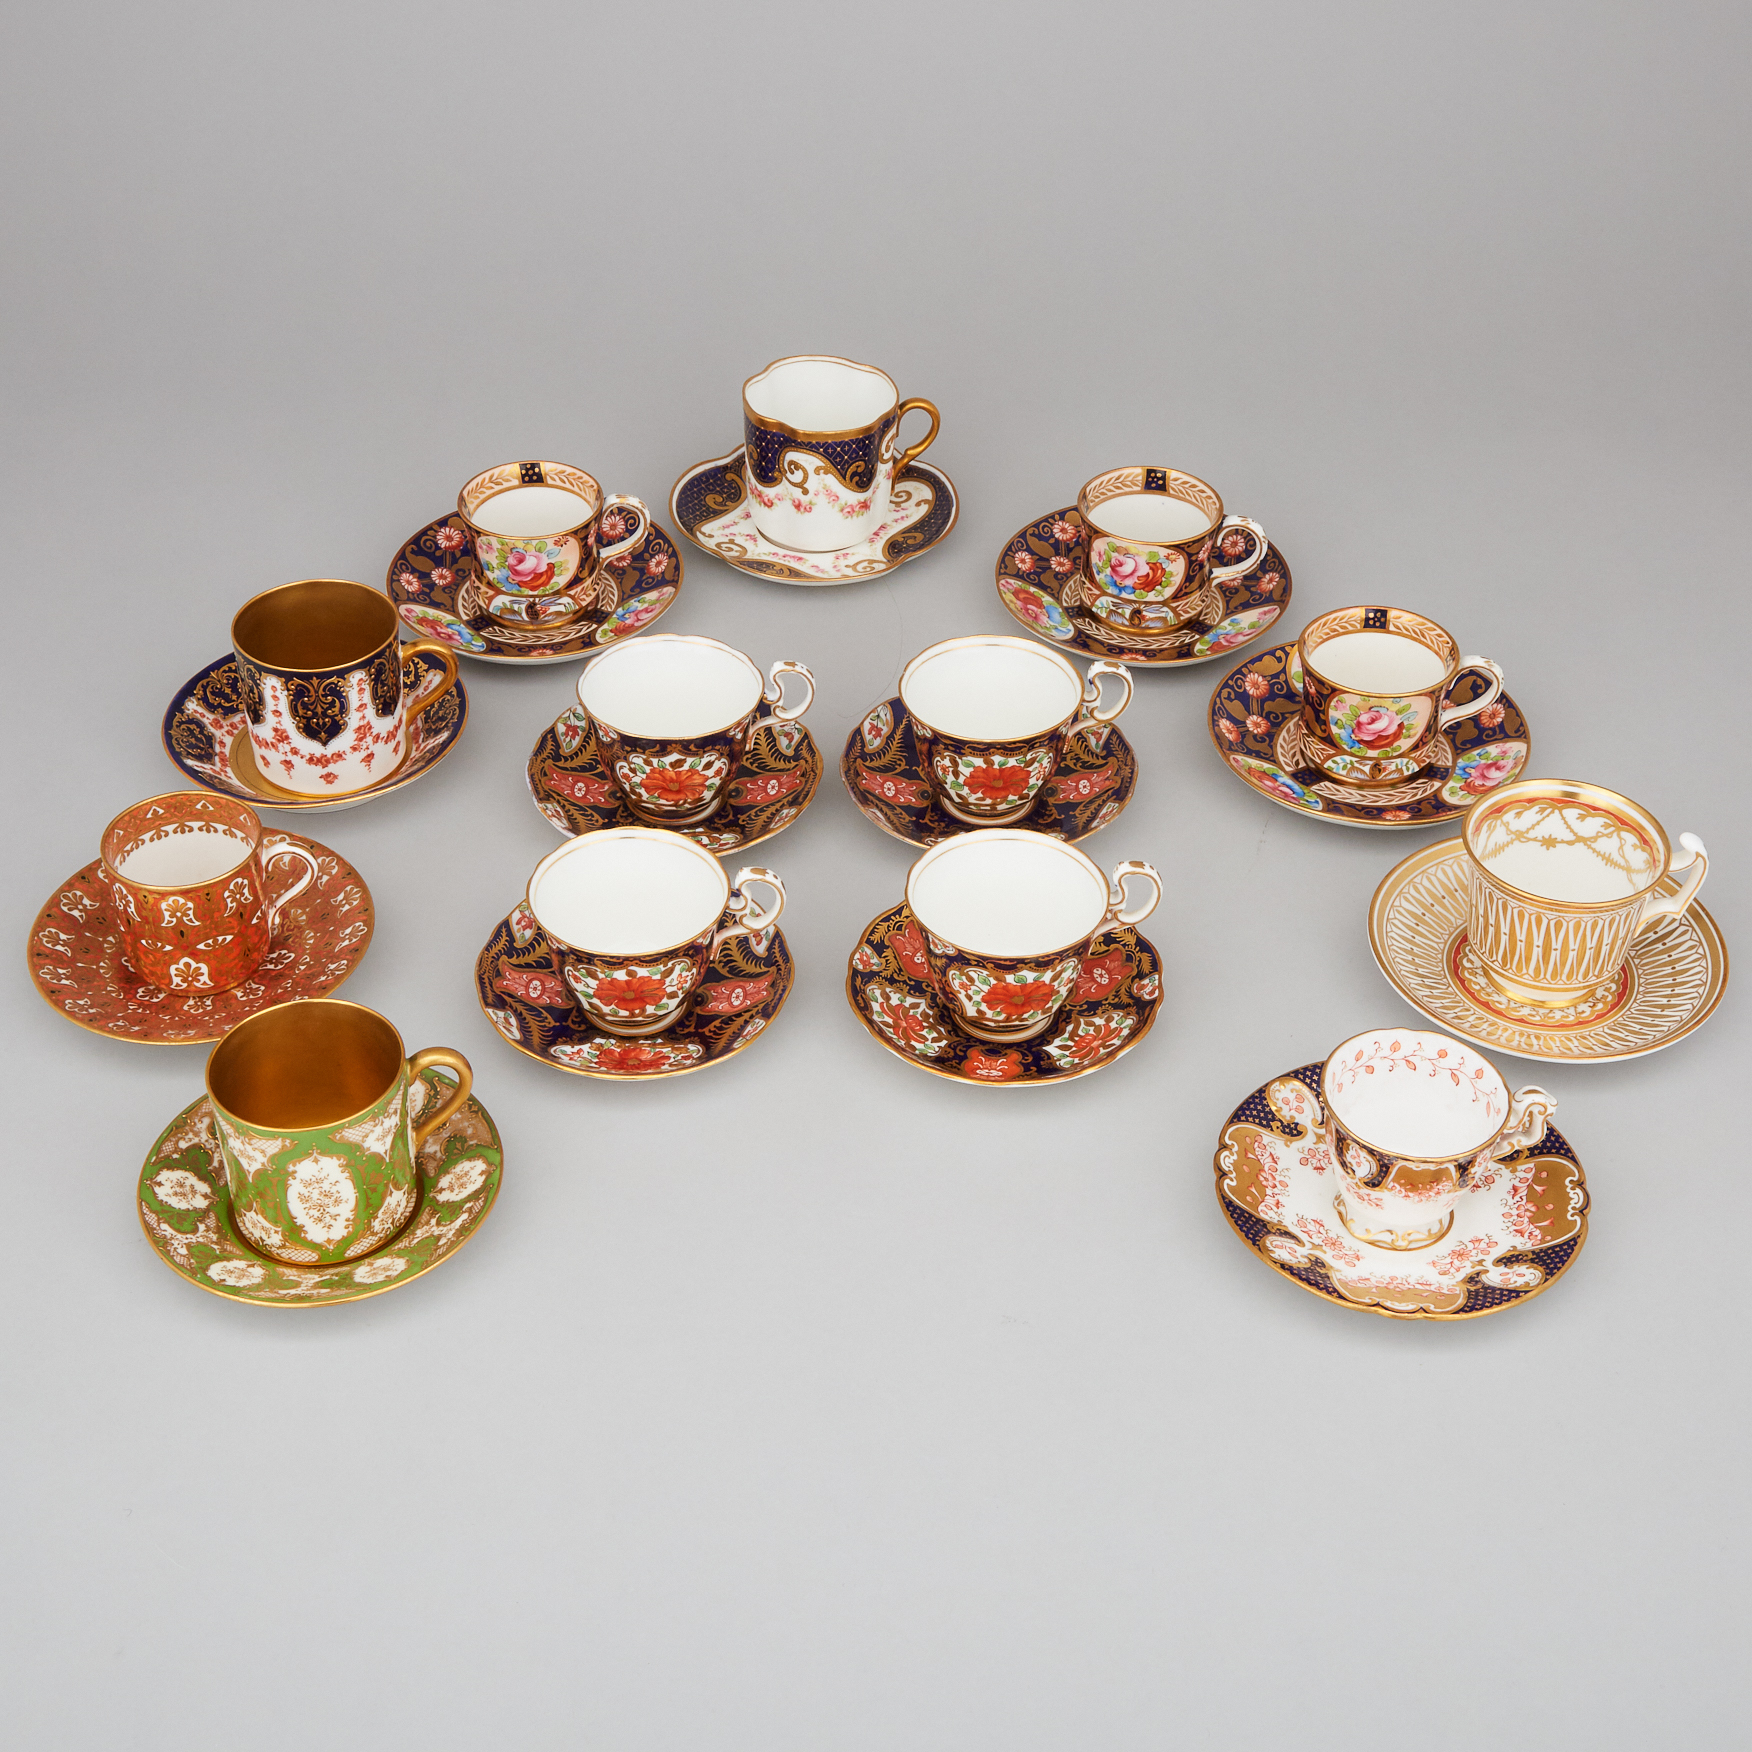 Thirteen Various English Porcelain Cups and Saucers, late 19th/20th century